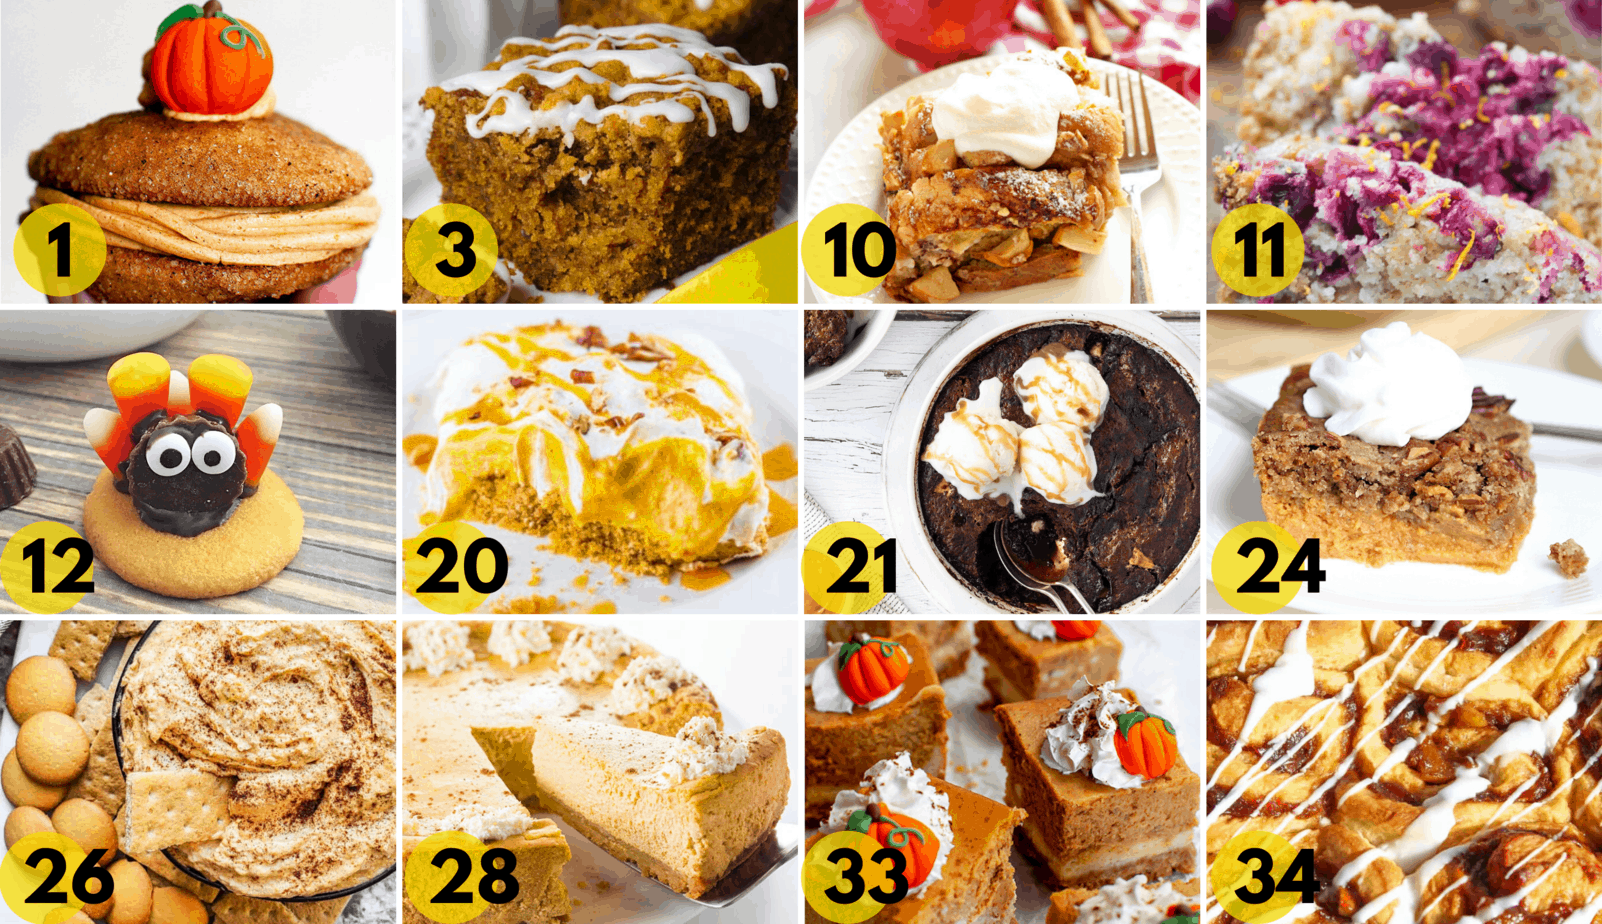 Here are 50+ affordable, easy, delicious and cheap thanksgiving desserts ideas compiled into a list that will help you save time and money this Thanksgiving!